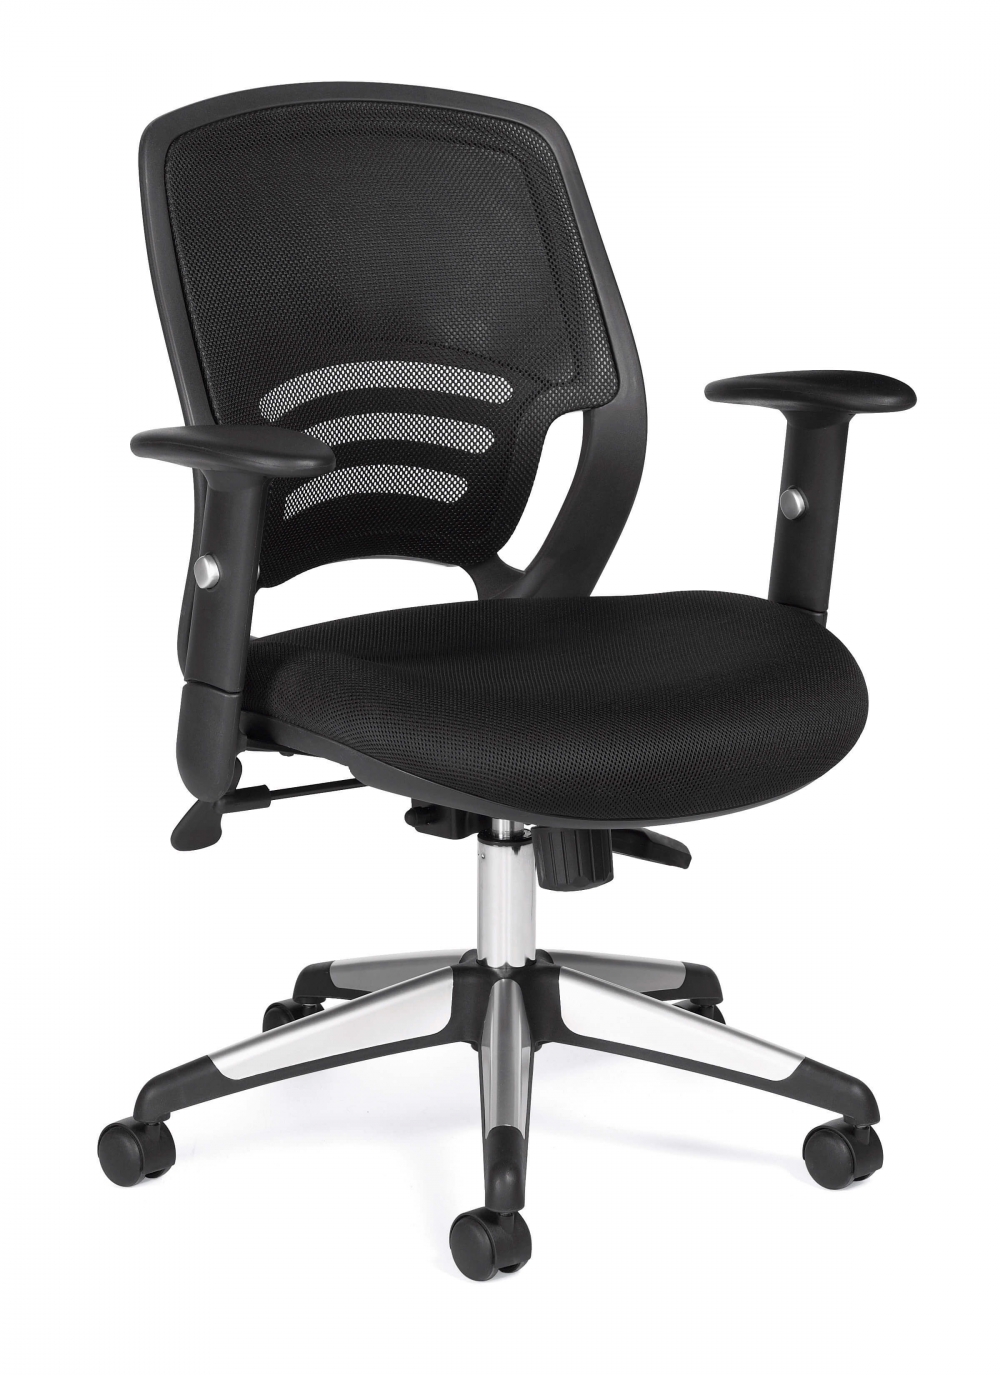 office-furniture-chairs-stylish-office-chairs.jpg